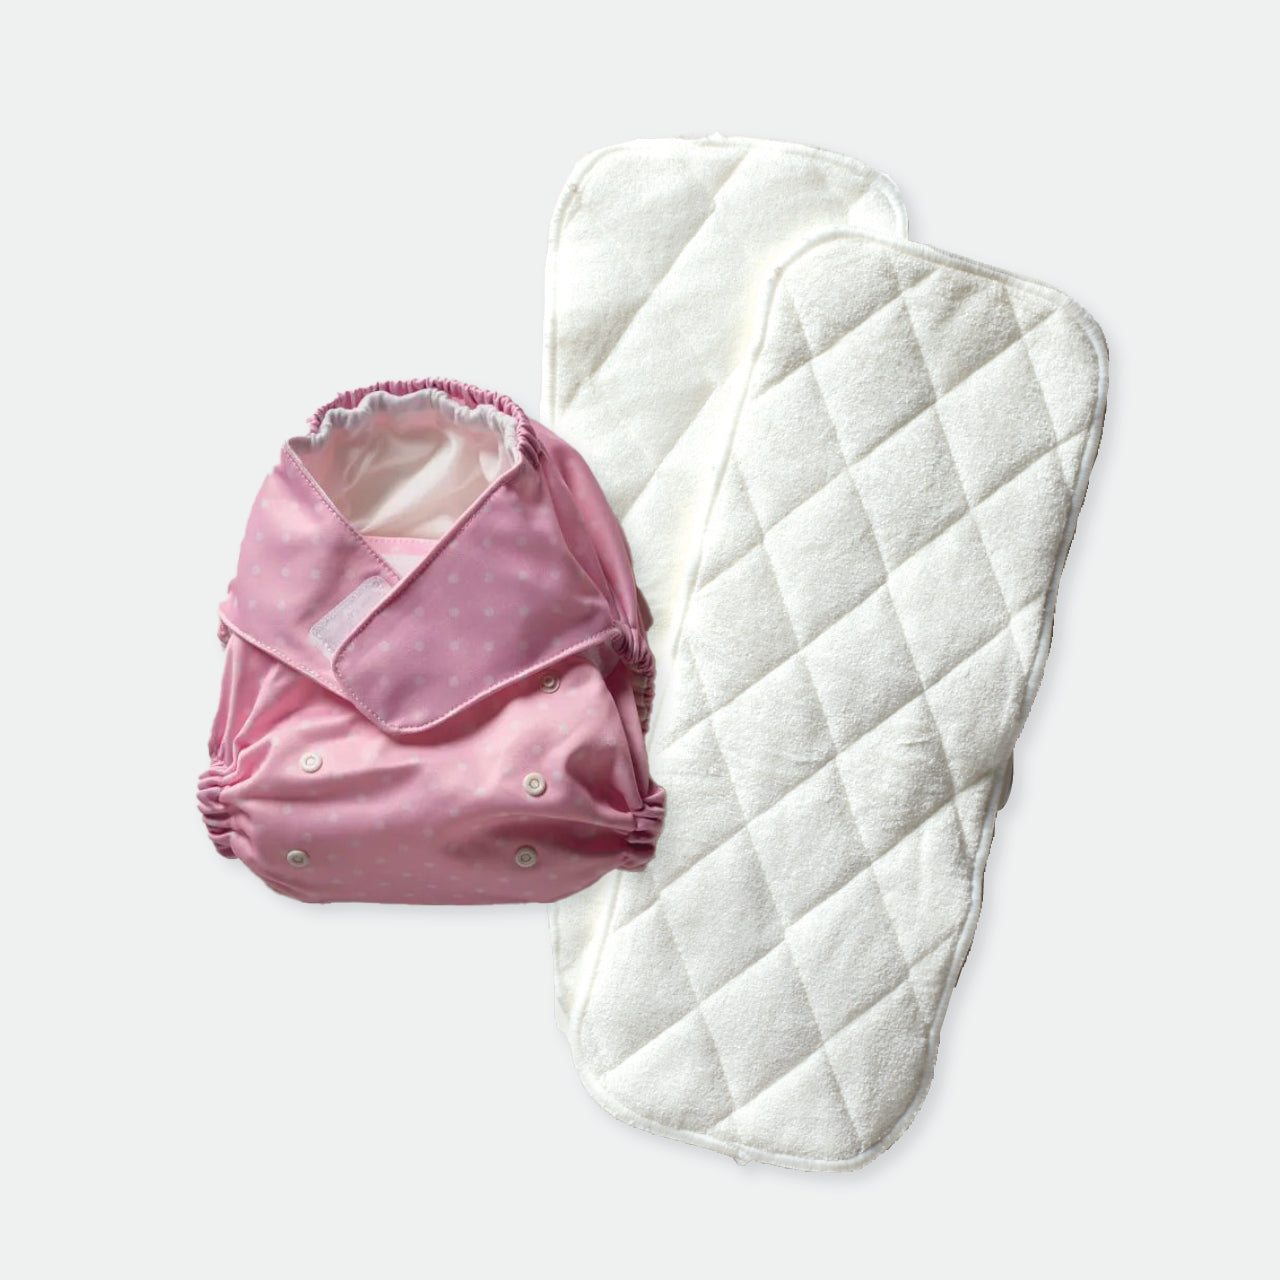 Baby Basics Pink Reusable Nappy on a white background